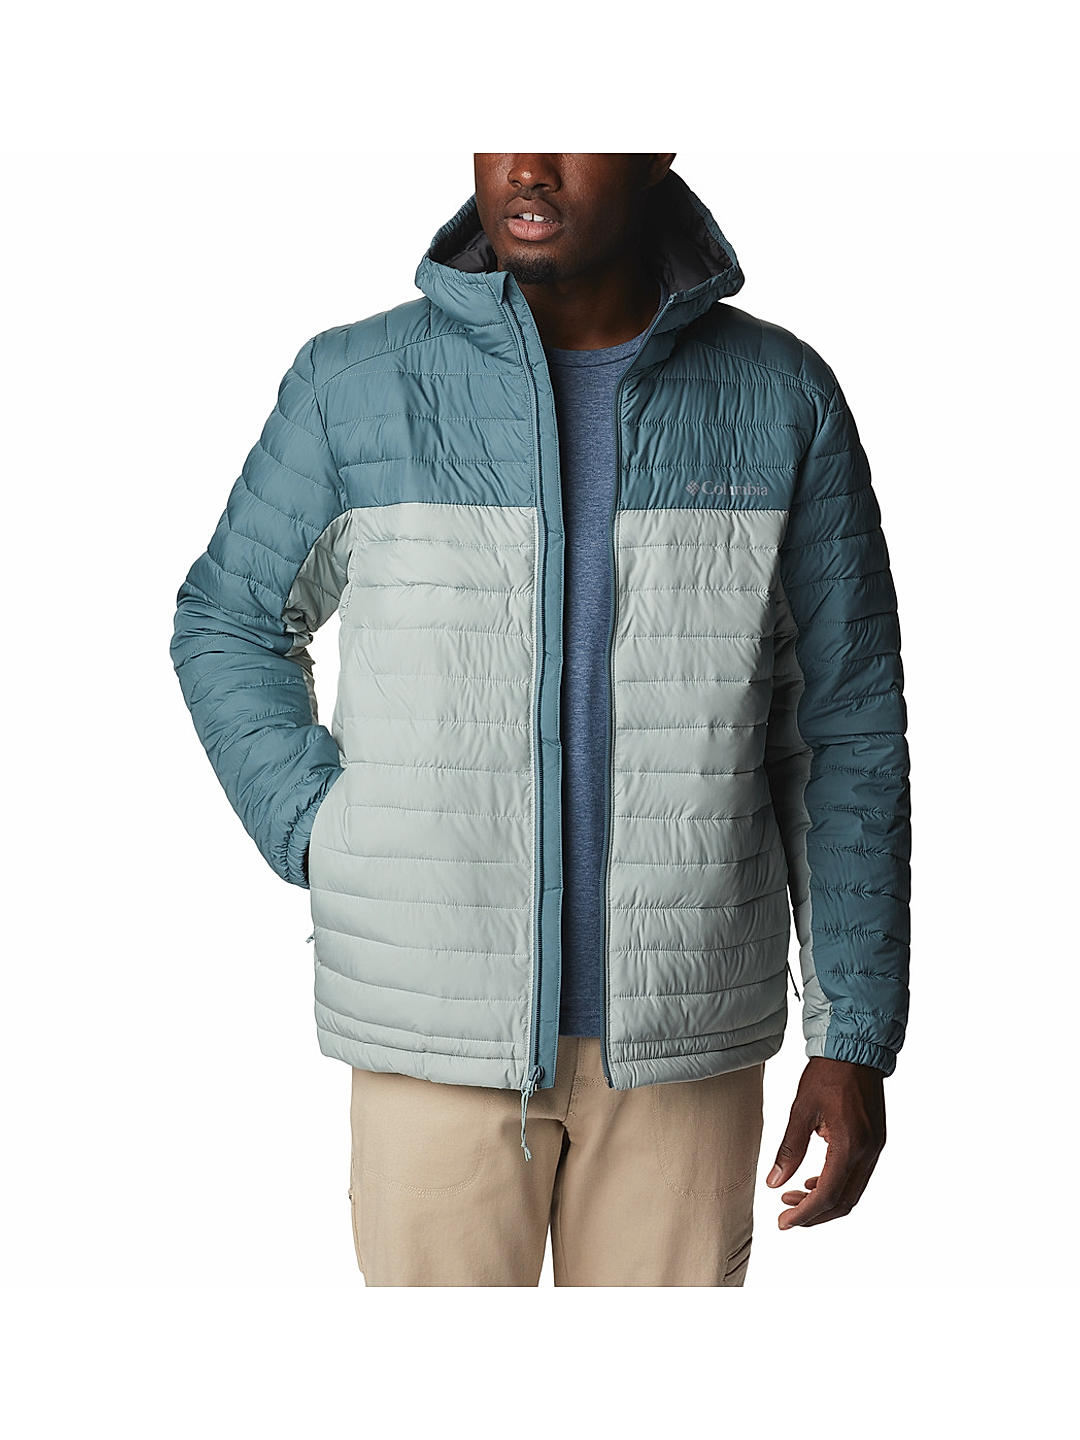 Buy Green Silver Falls Hooded Jacket For Men Online at Columbia | 508197